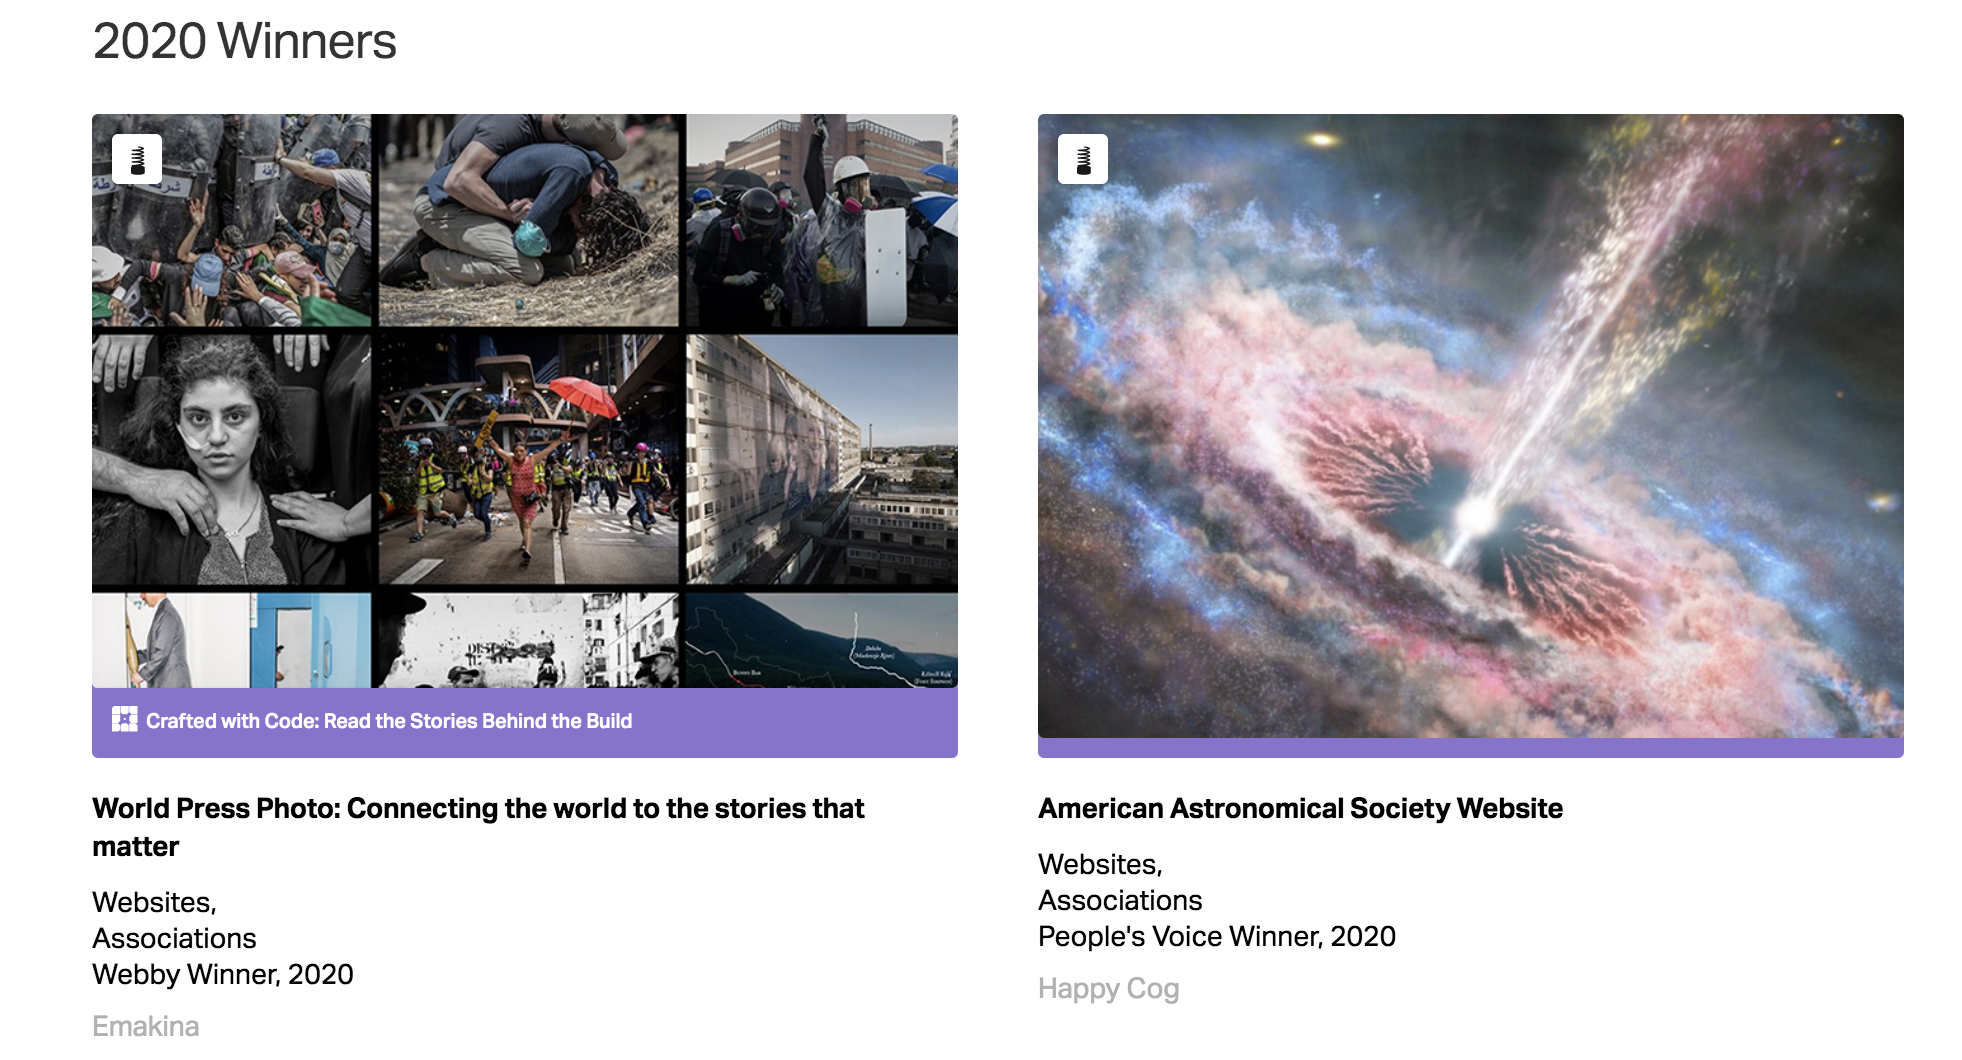 AAS website wins the Webby People's Voice Awards 2020